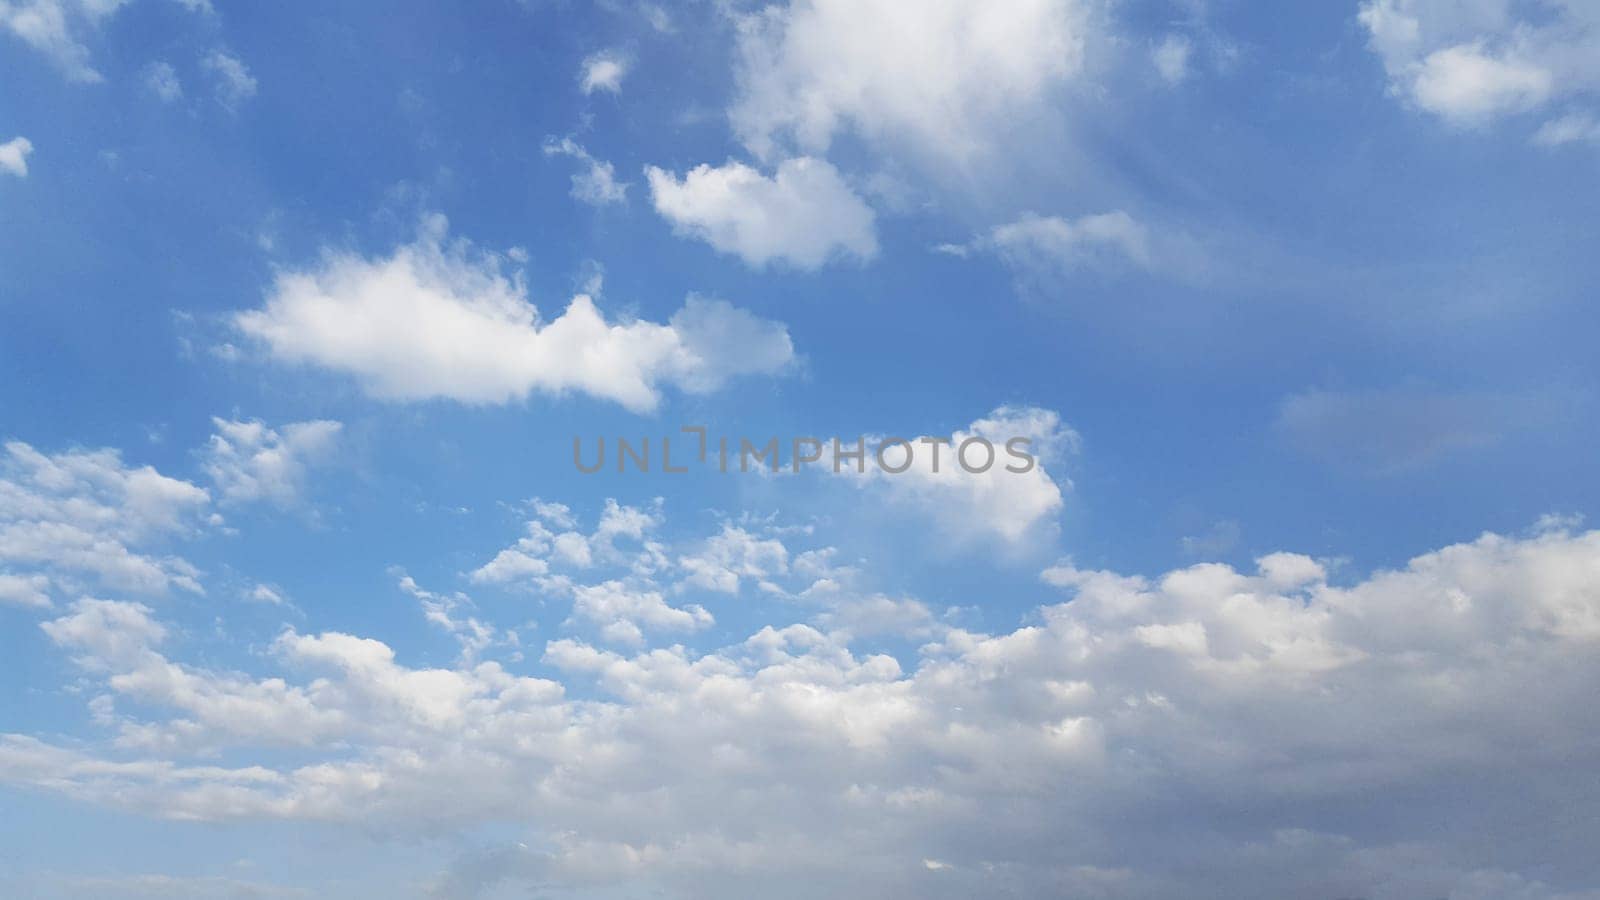 Above, the azure expanse is decorated with fluffy cumulus clouds, fashioning a picturesque natural vista.